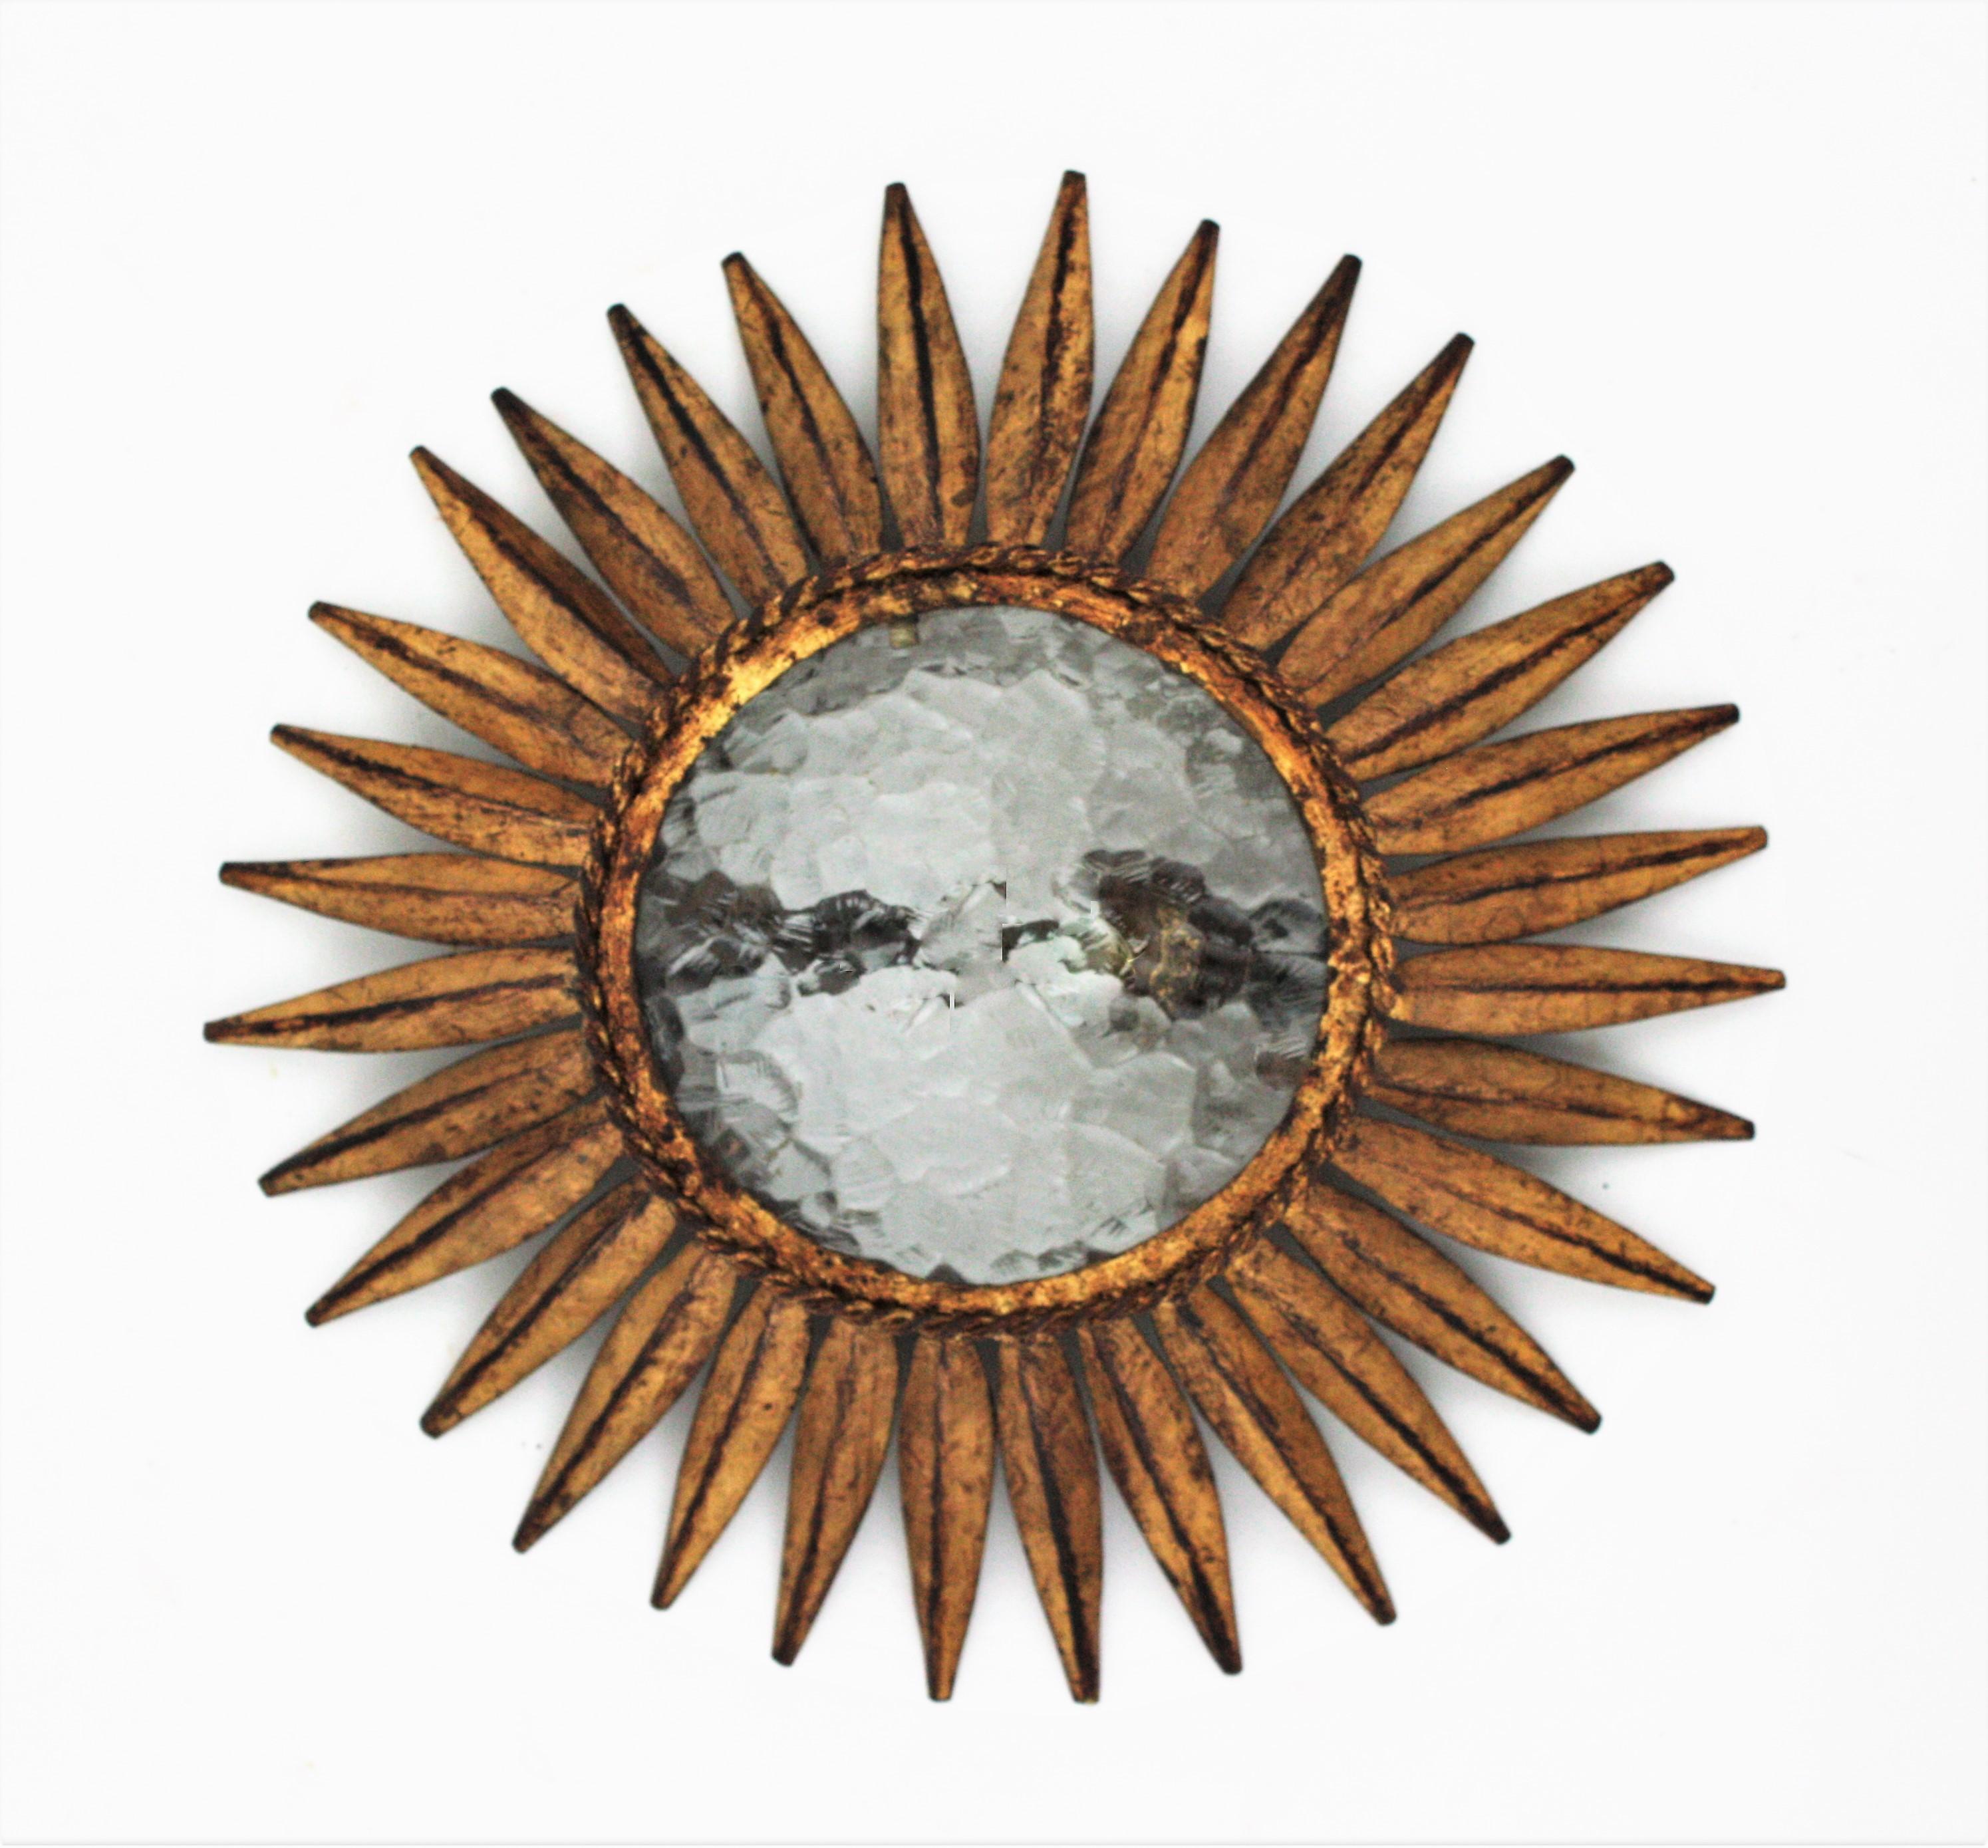 Spanish Sunburst Crown Ceiling Light Fixture, Gilt Iron and Textured Glass In Good Condition For Sale In Barcelona, ES